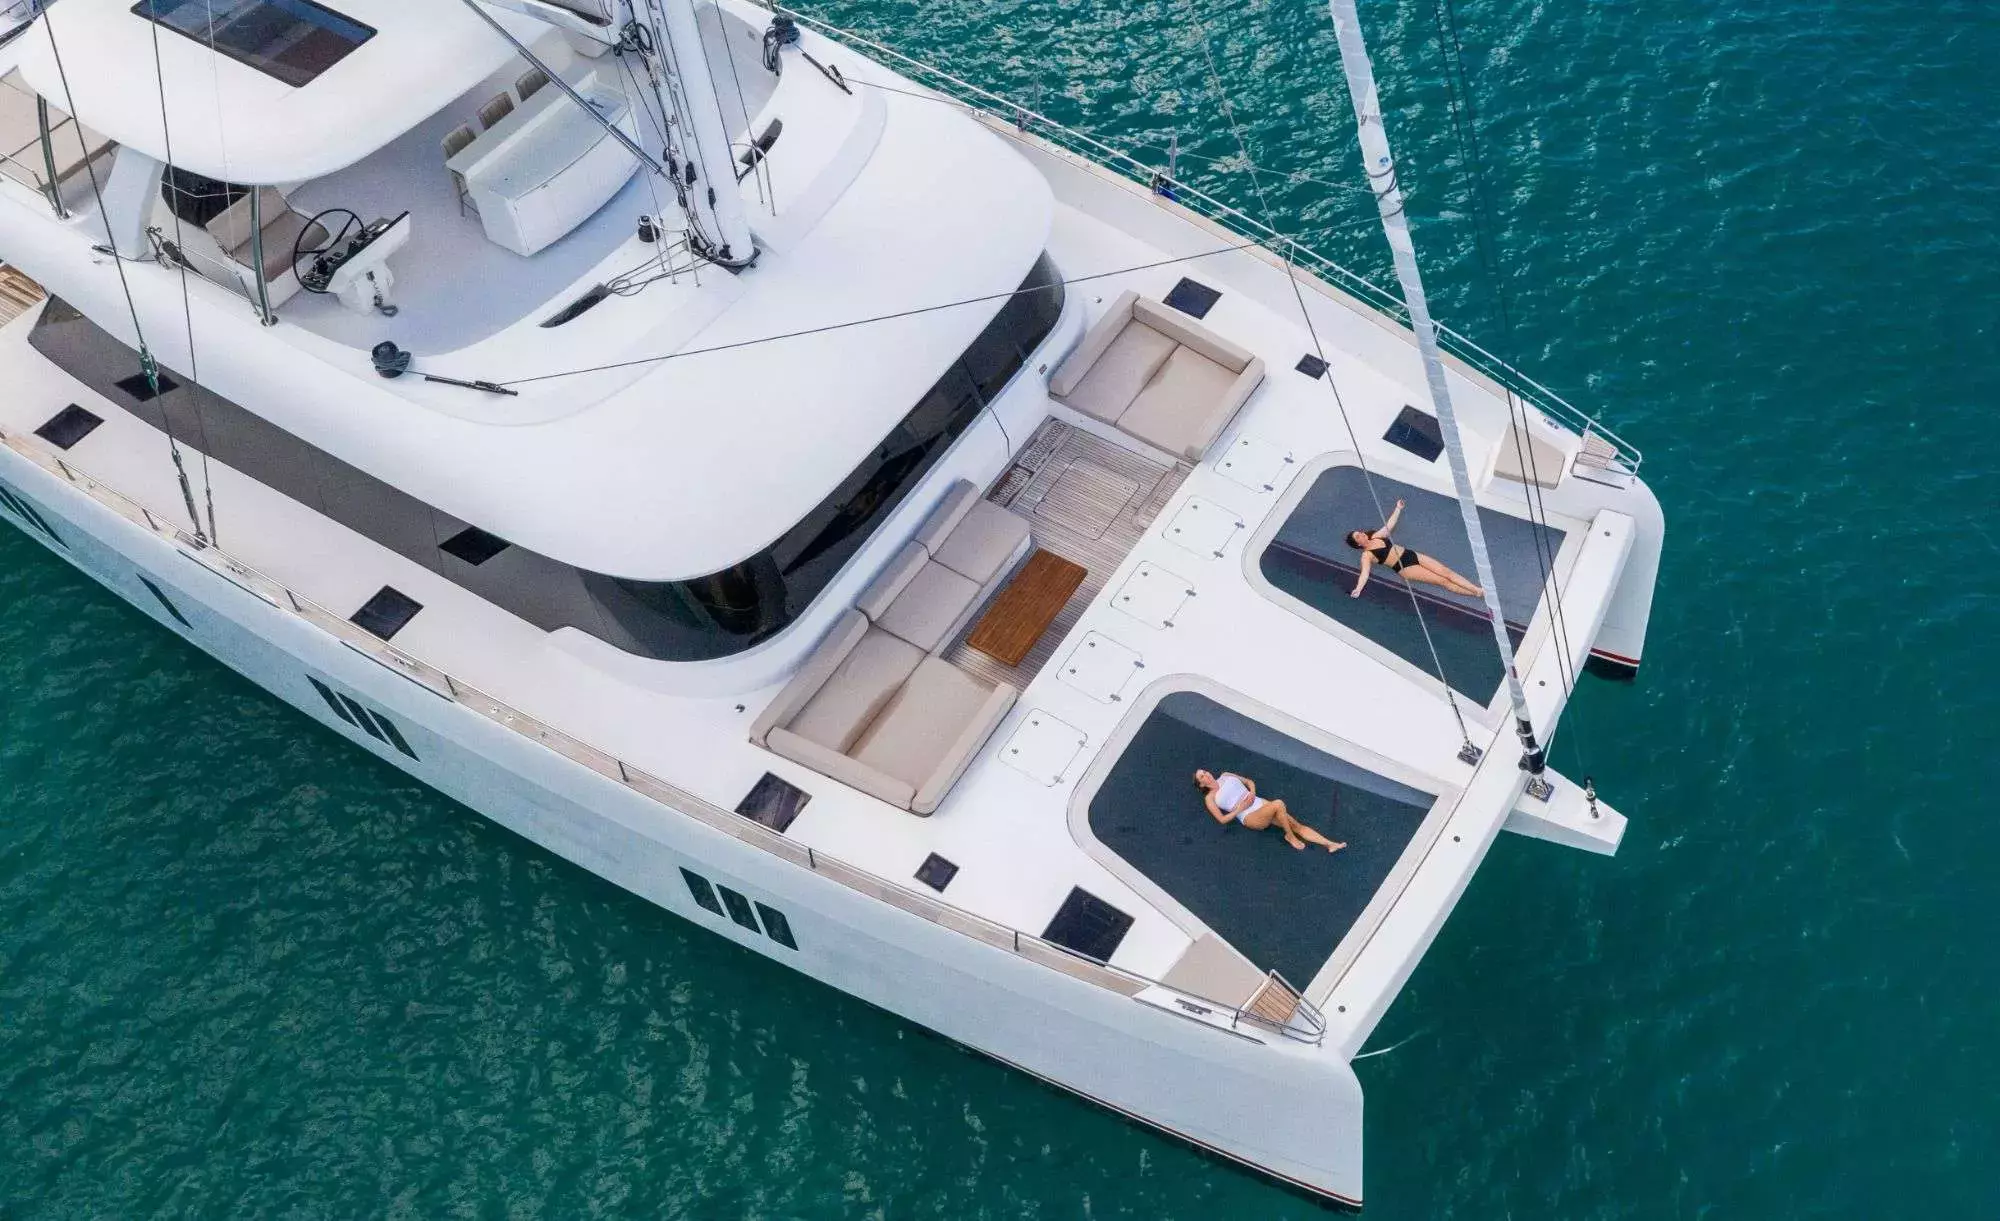 Bundalong by Sunreef Yachts - Top rates for a Charter of a private Luxury Catamaran in British Virgin Islands